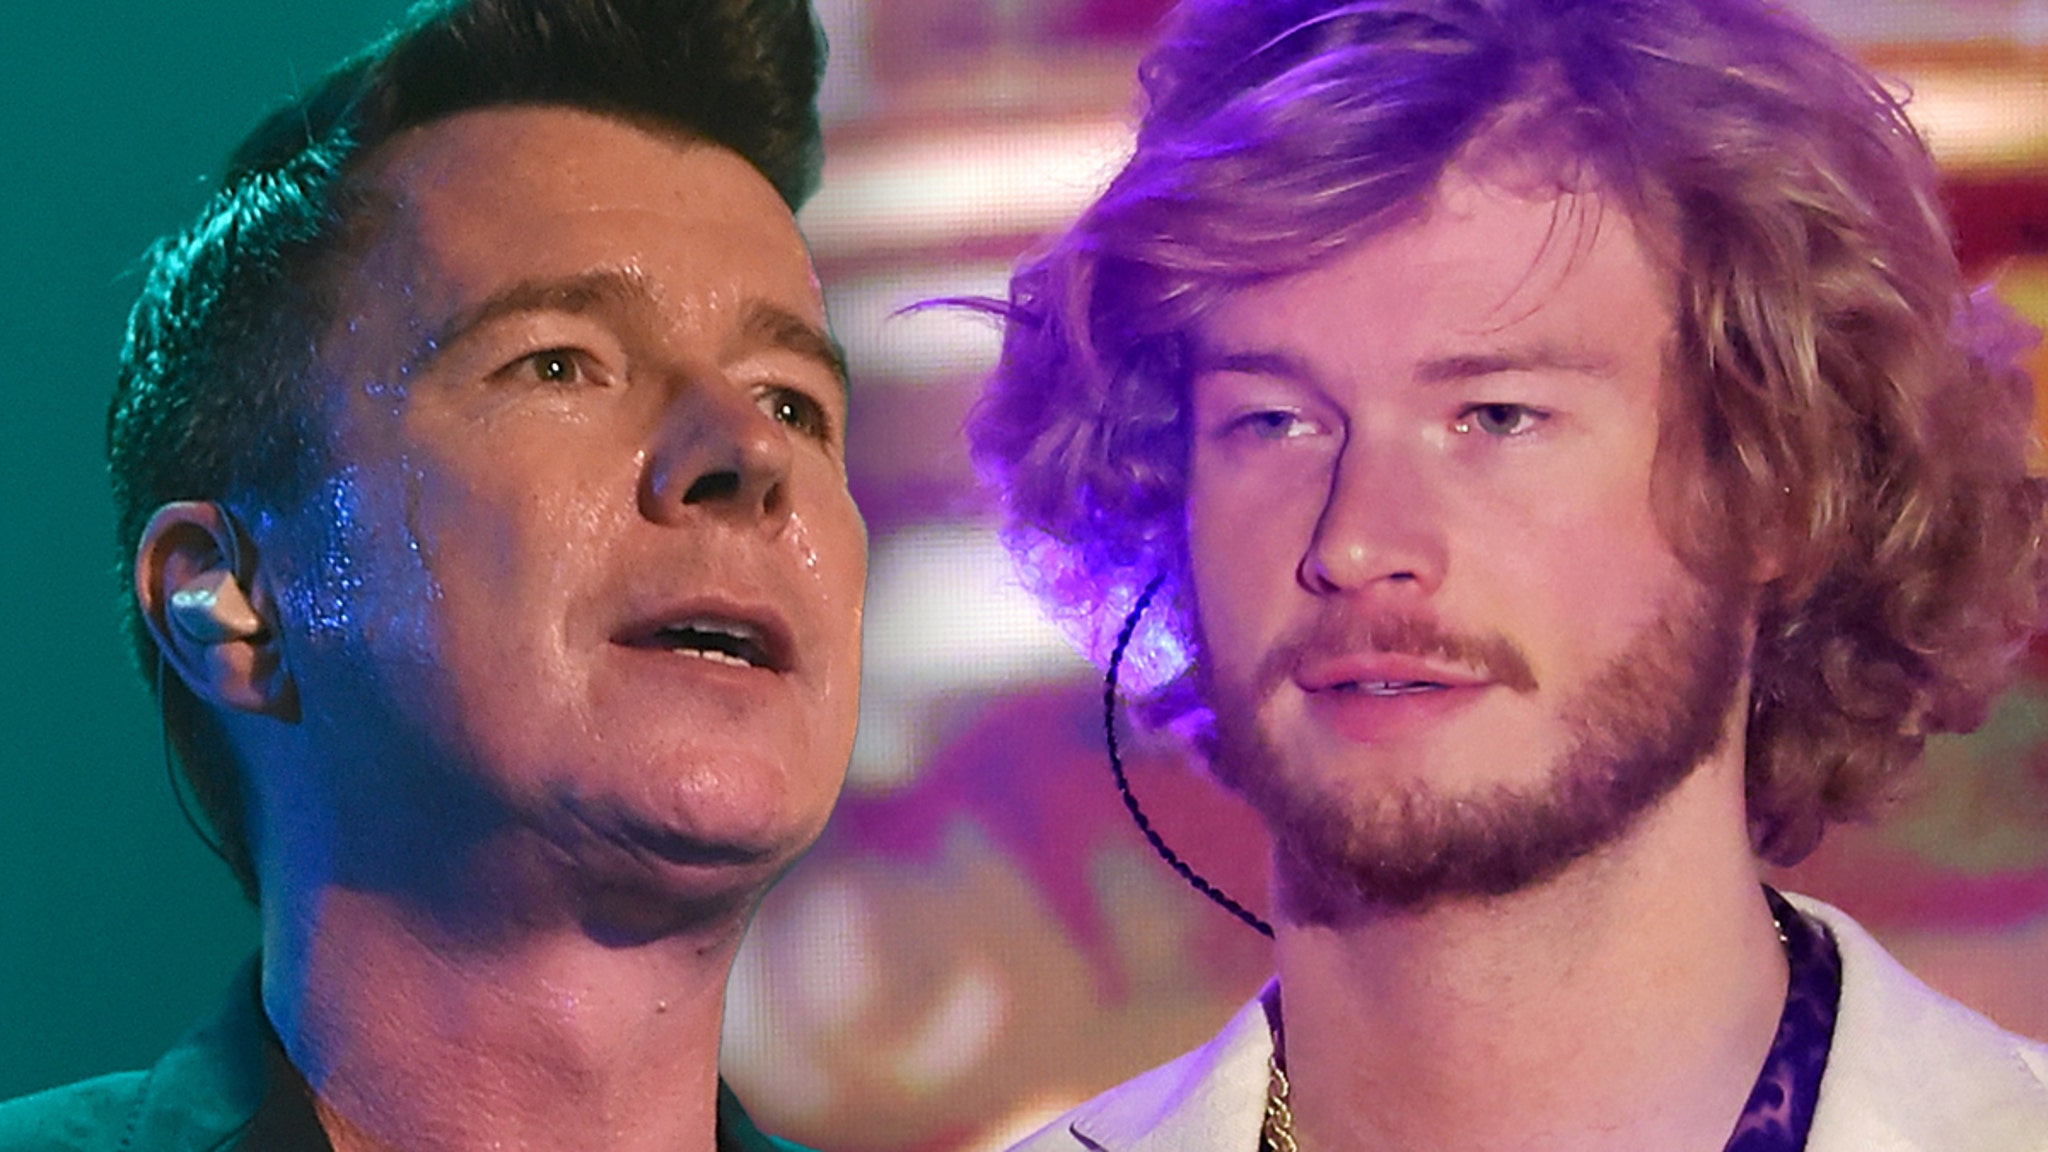 Young Gravy sued Rick Astley for copying the vocals of “I’ll Never Give You Up”